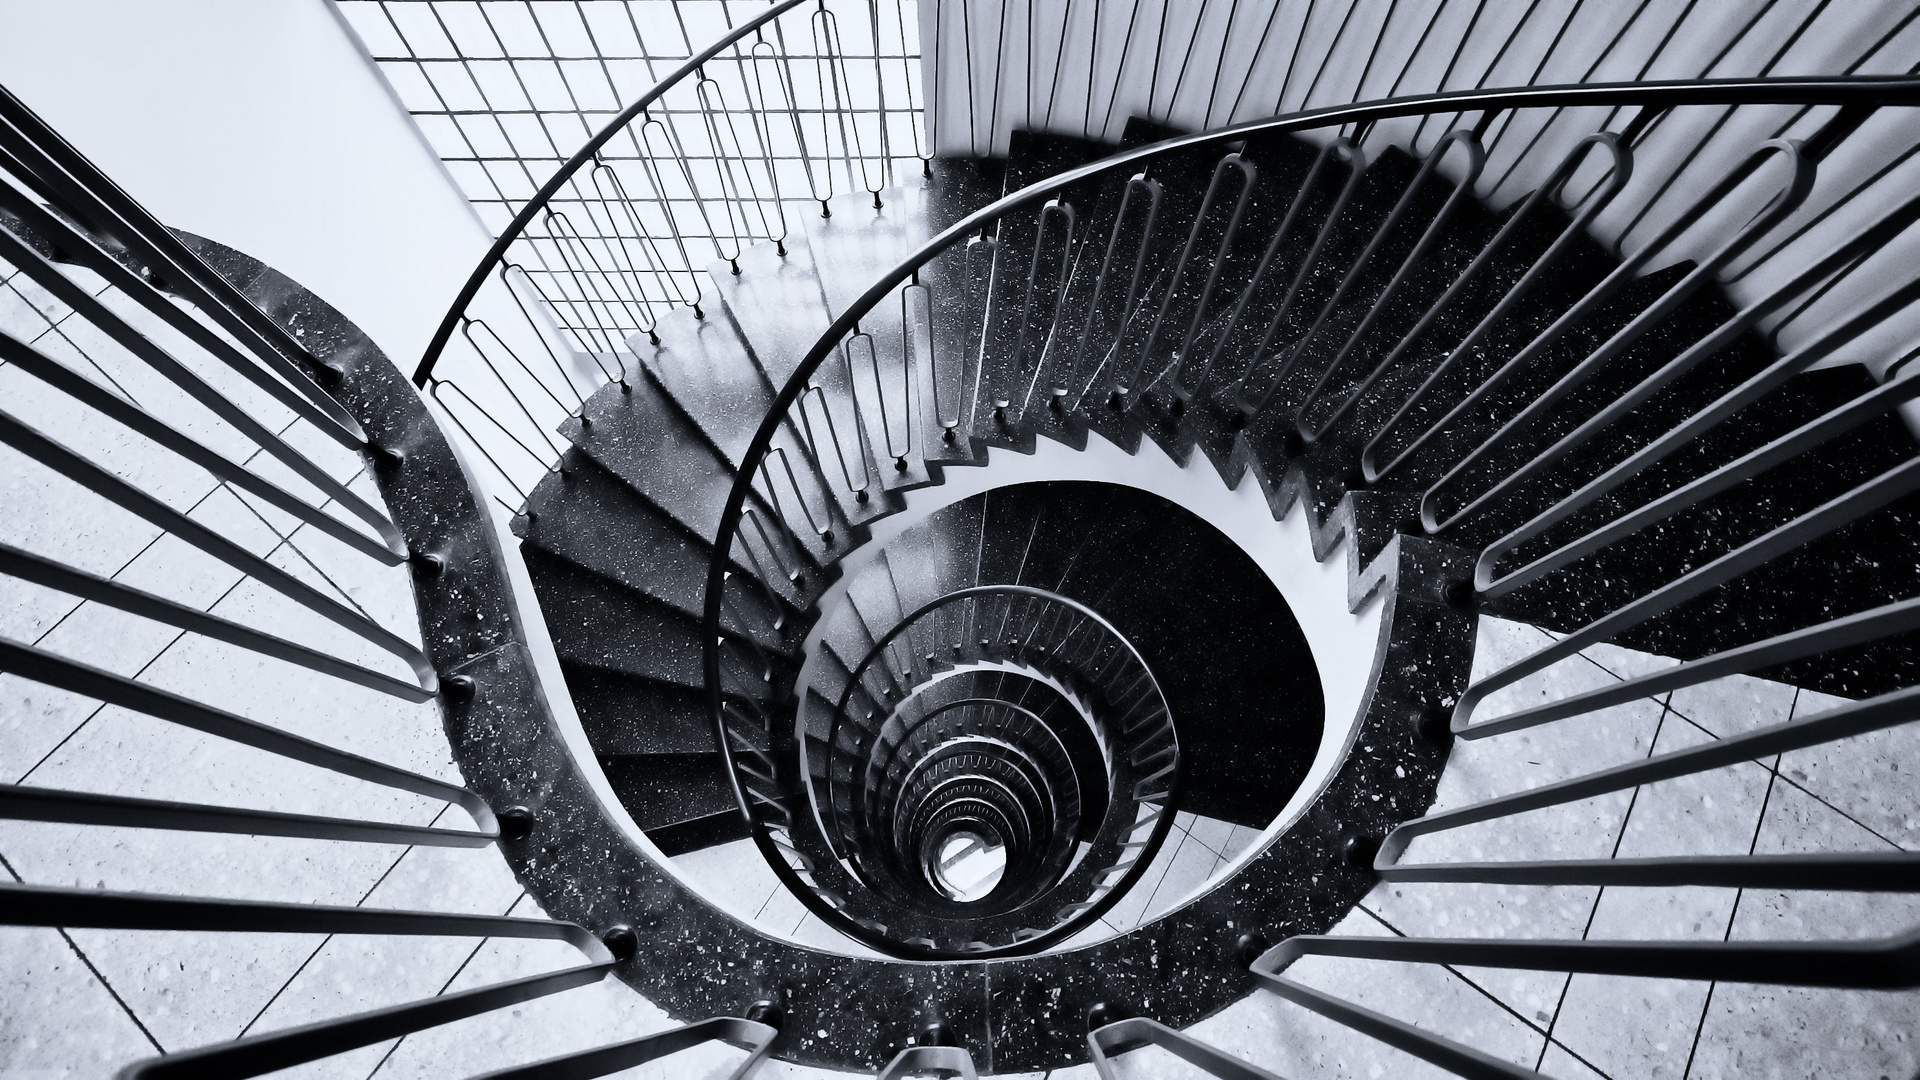 From the Series: Staircase Abstractions [19]